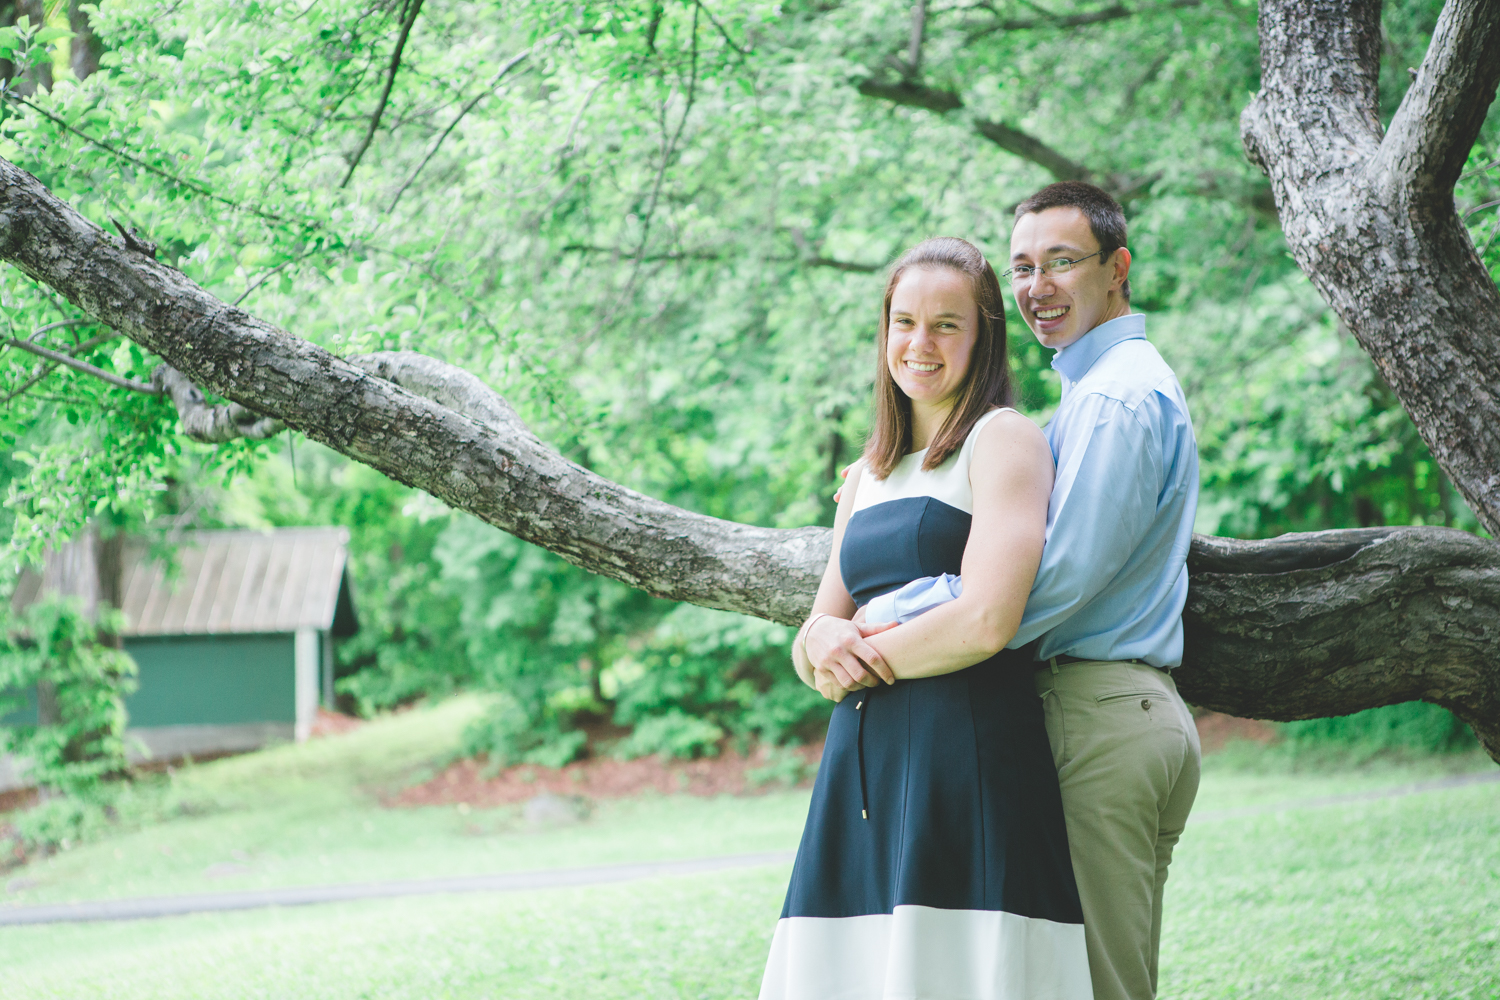 Engagement photos | Woodstock, Vermont | Amy Donohue Photography